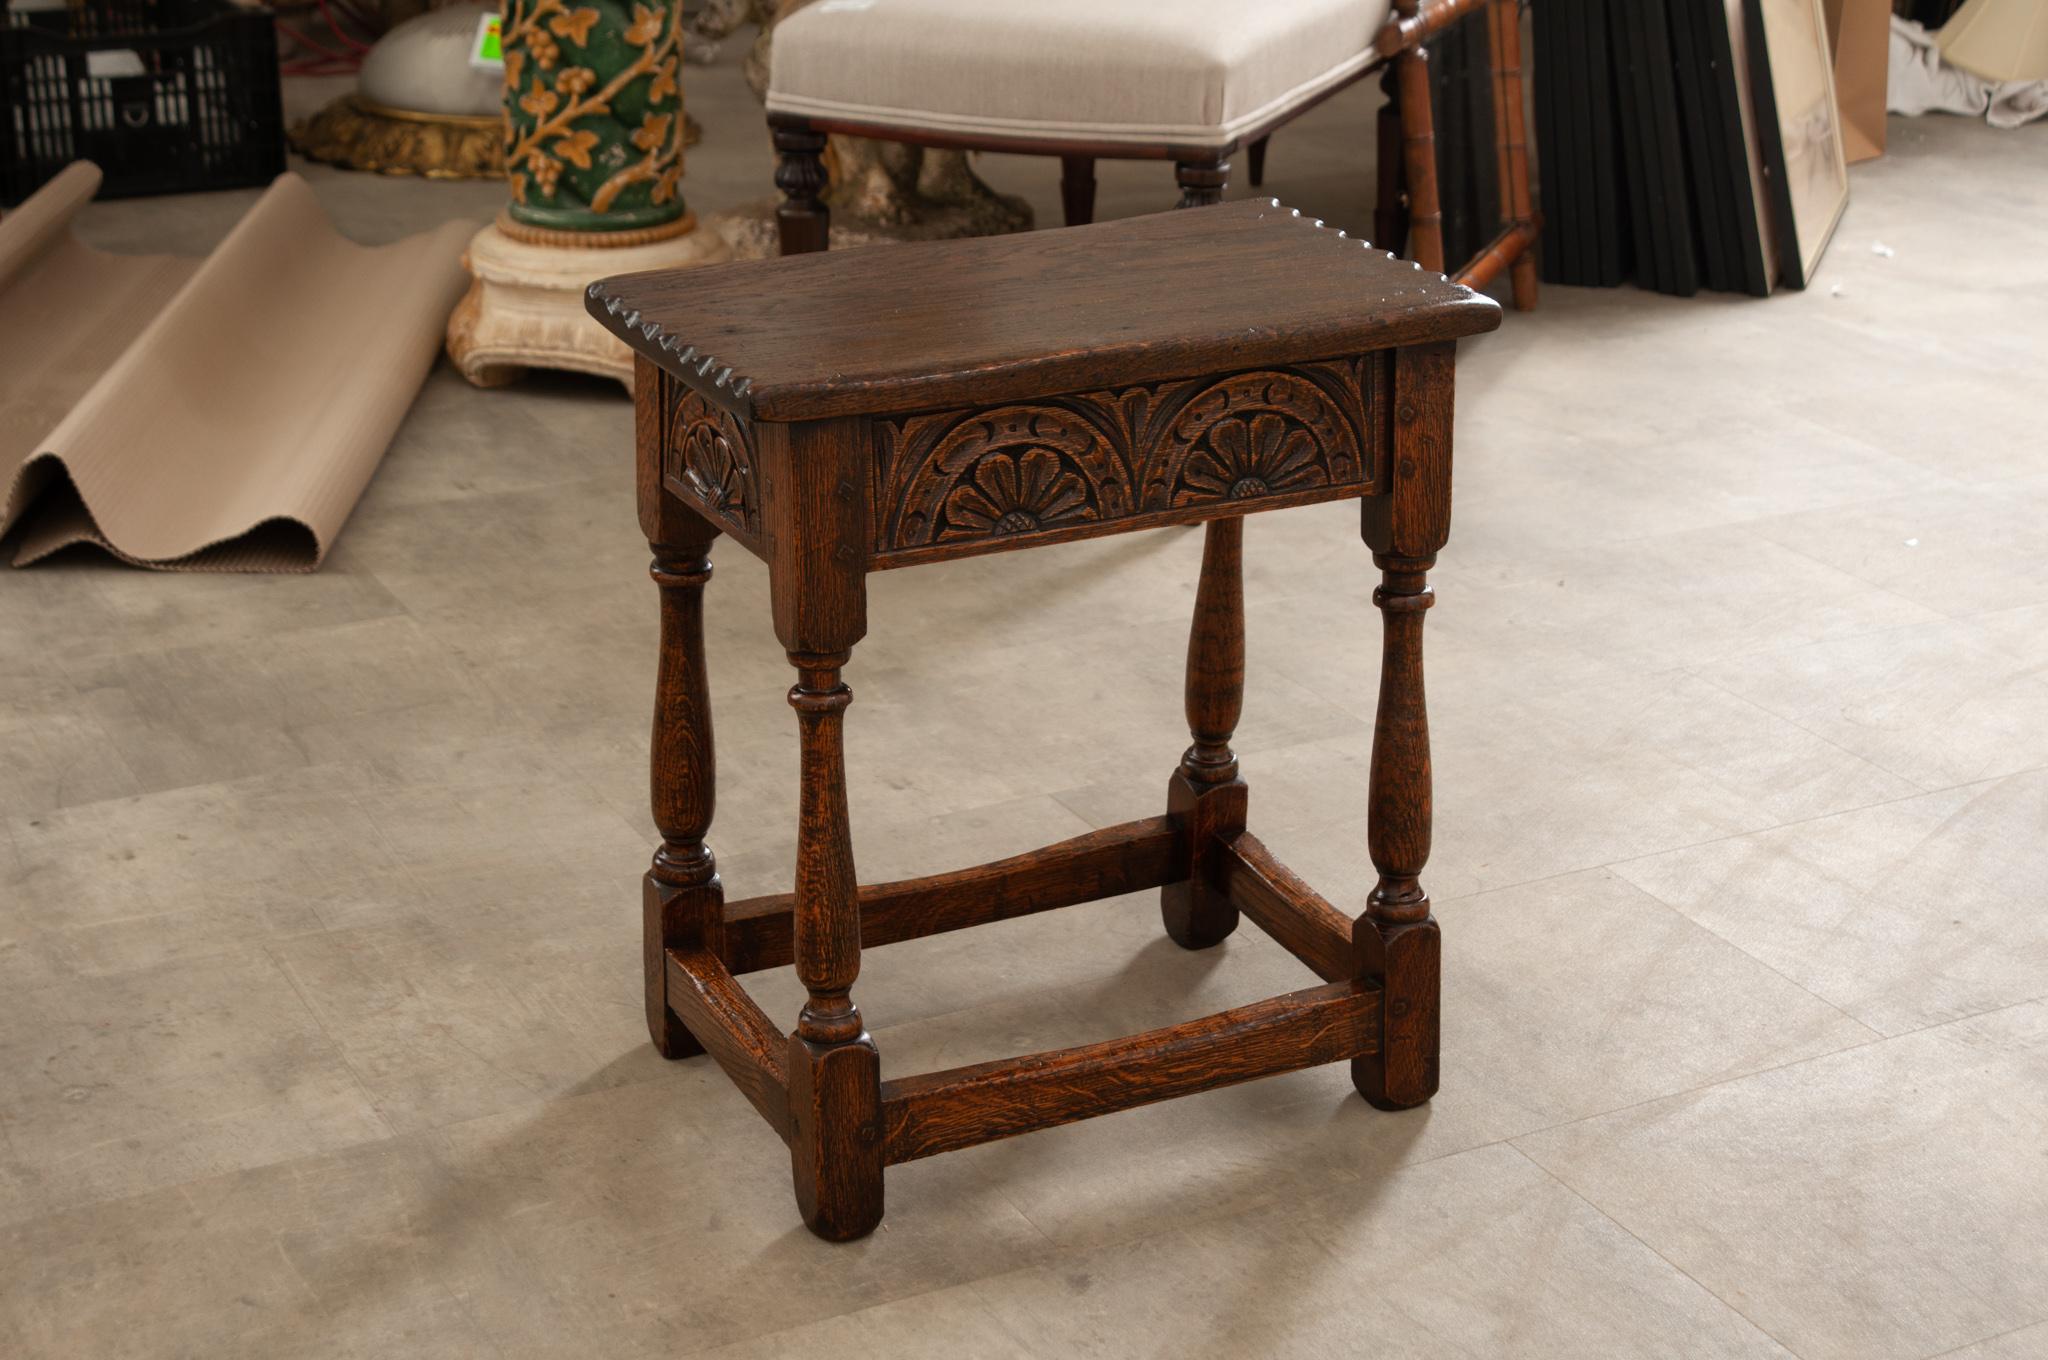 A lovely English oak joint stool with hand-carved motifs, 2 scalloped edges, and turned legs. Created in England in the 19th century, this oak joint stool features a rectangular top sitting above a hand-carved apron. The ensemble is resting on four